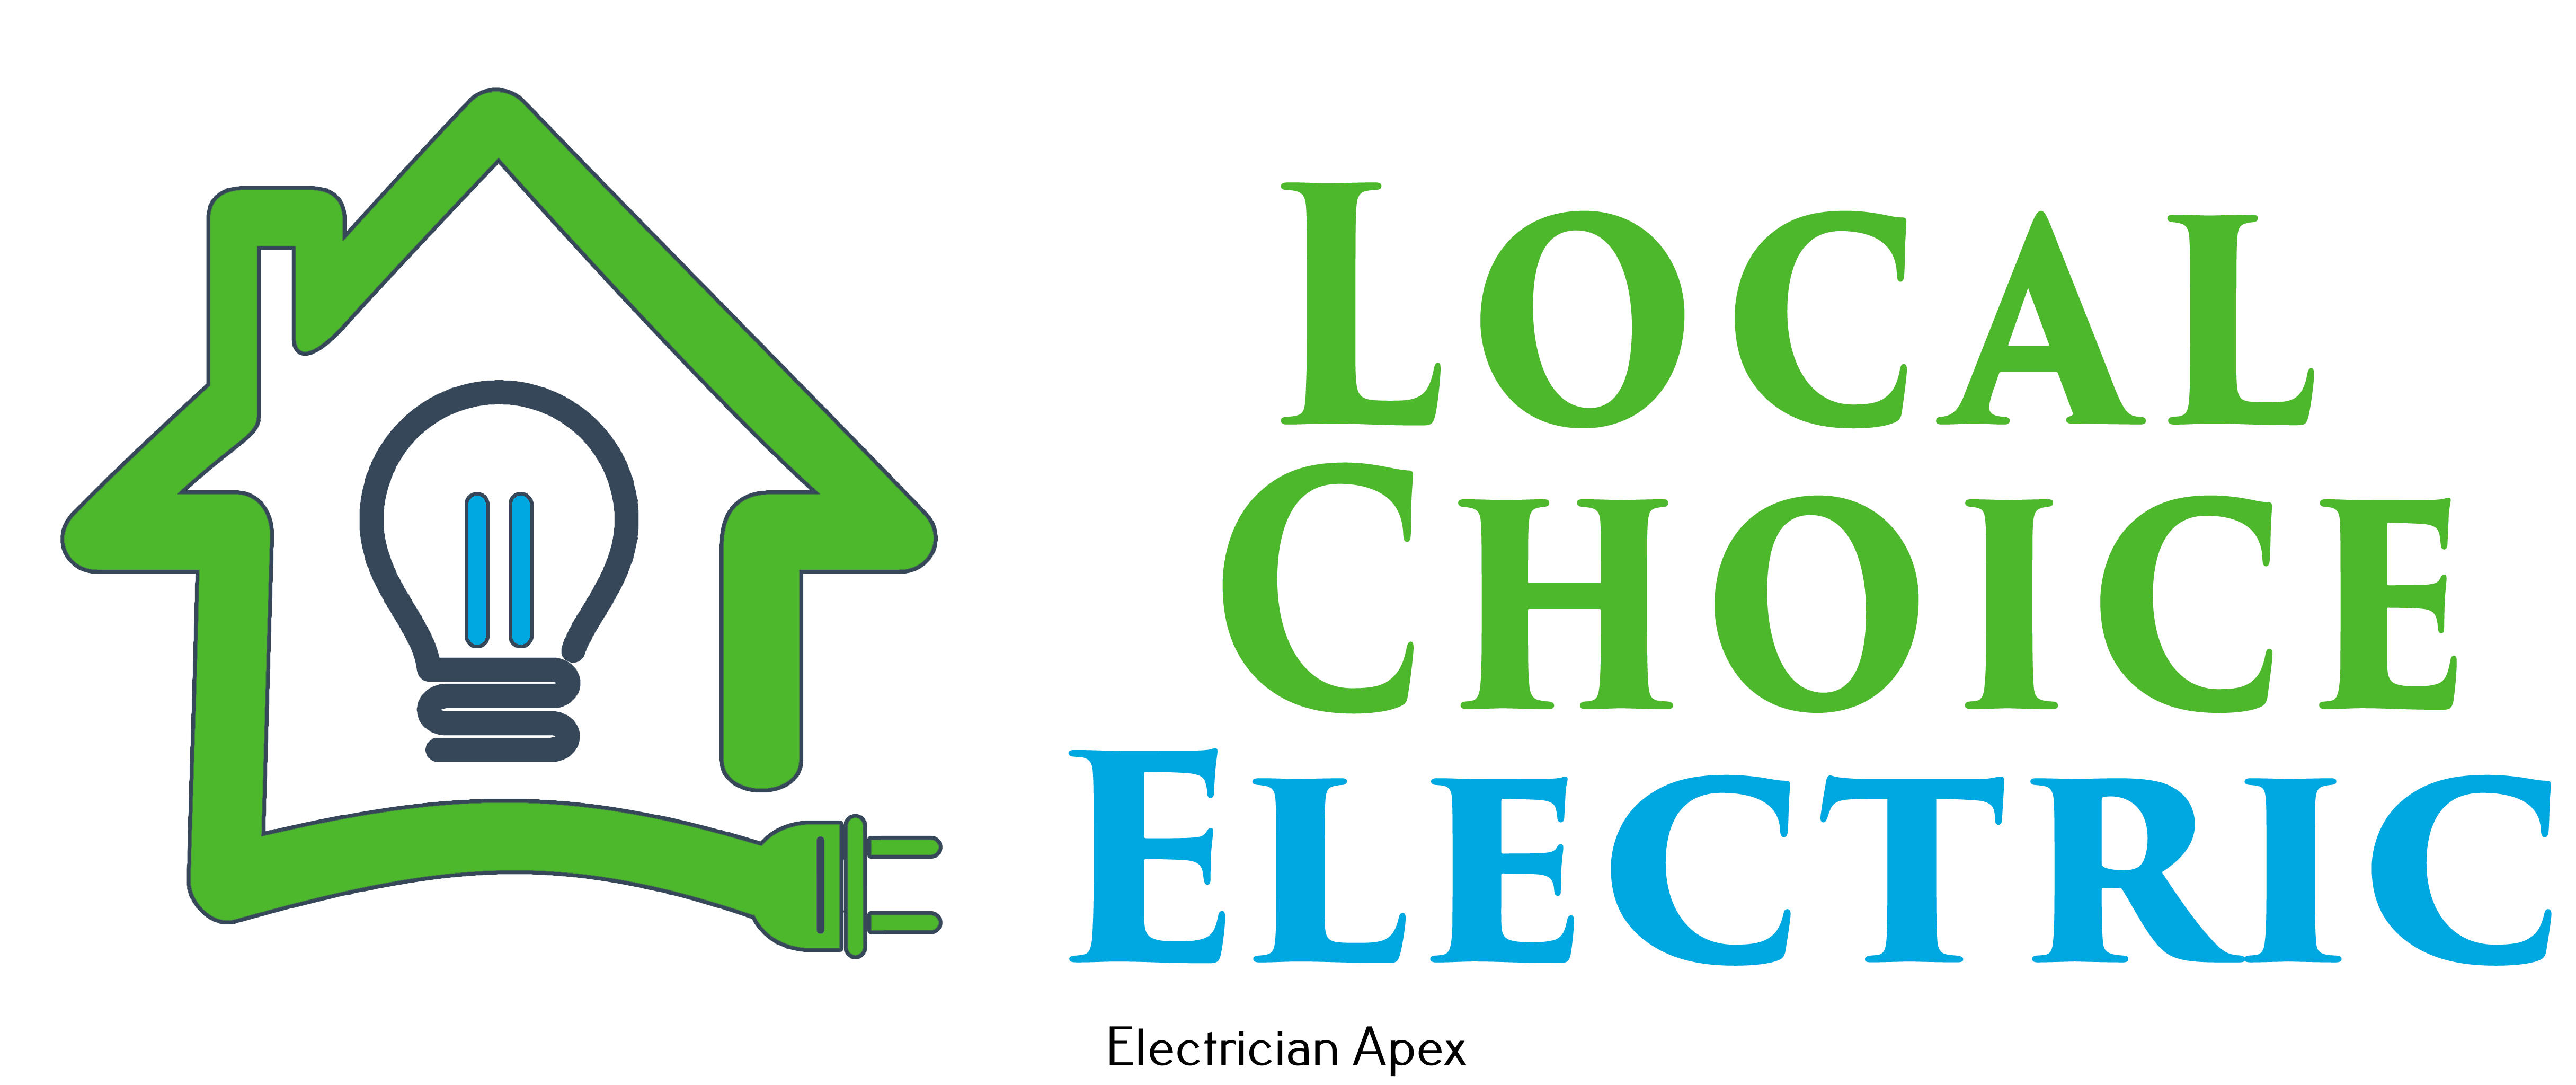 Top-Rated Electrician Apex Offers Comprehensive Electrical Services